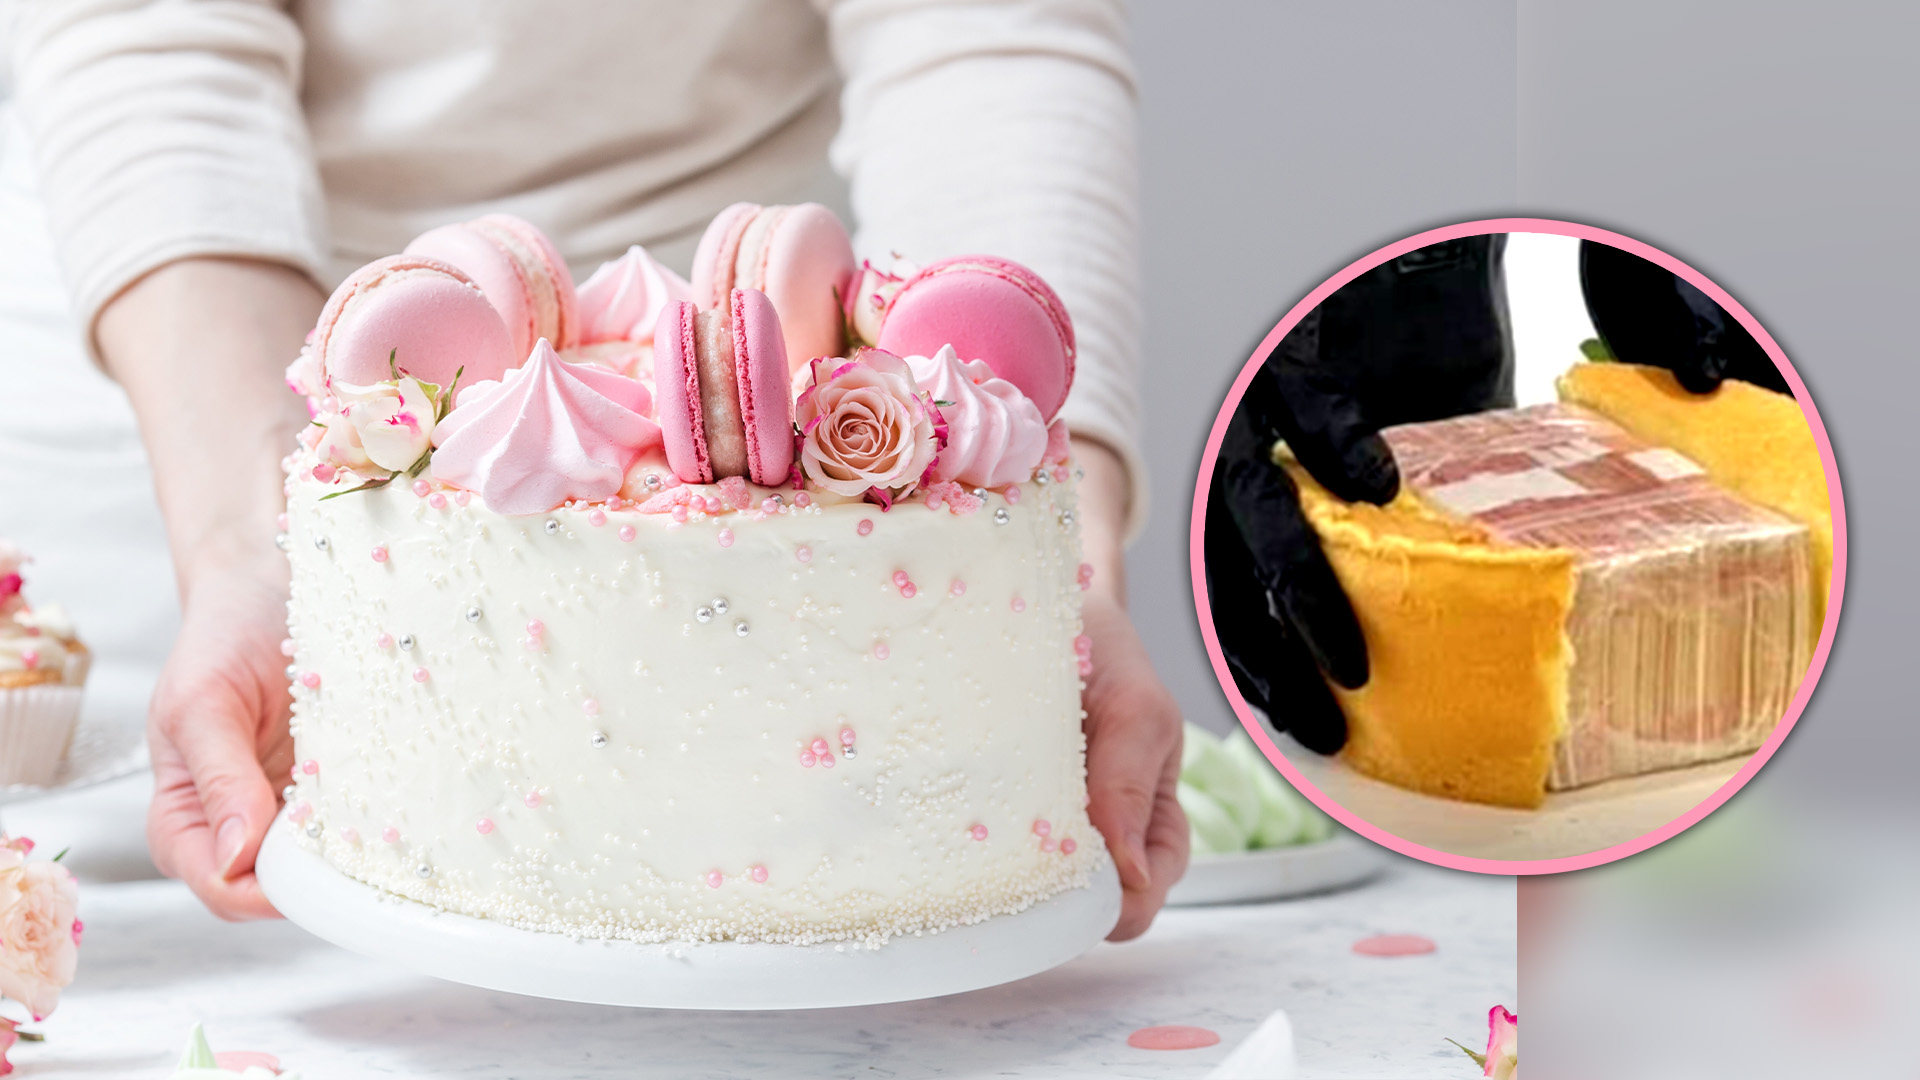 An innocent baker in China has found himself unwittingly caught up in a crime investigation after he completed an order for a customer who asked him to make a cake with a pile of cash hidden inside it. Photo: SCMP composite/Shutterstock/Weibo